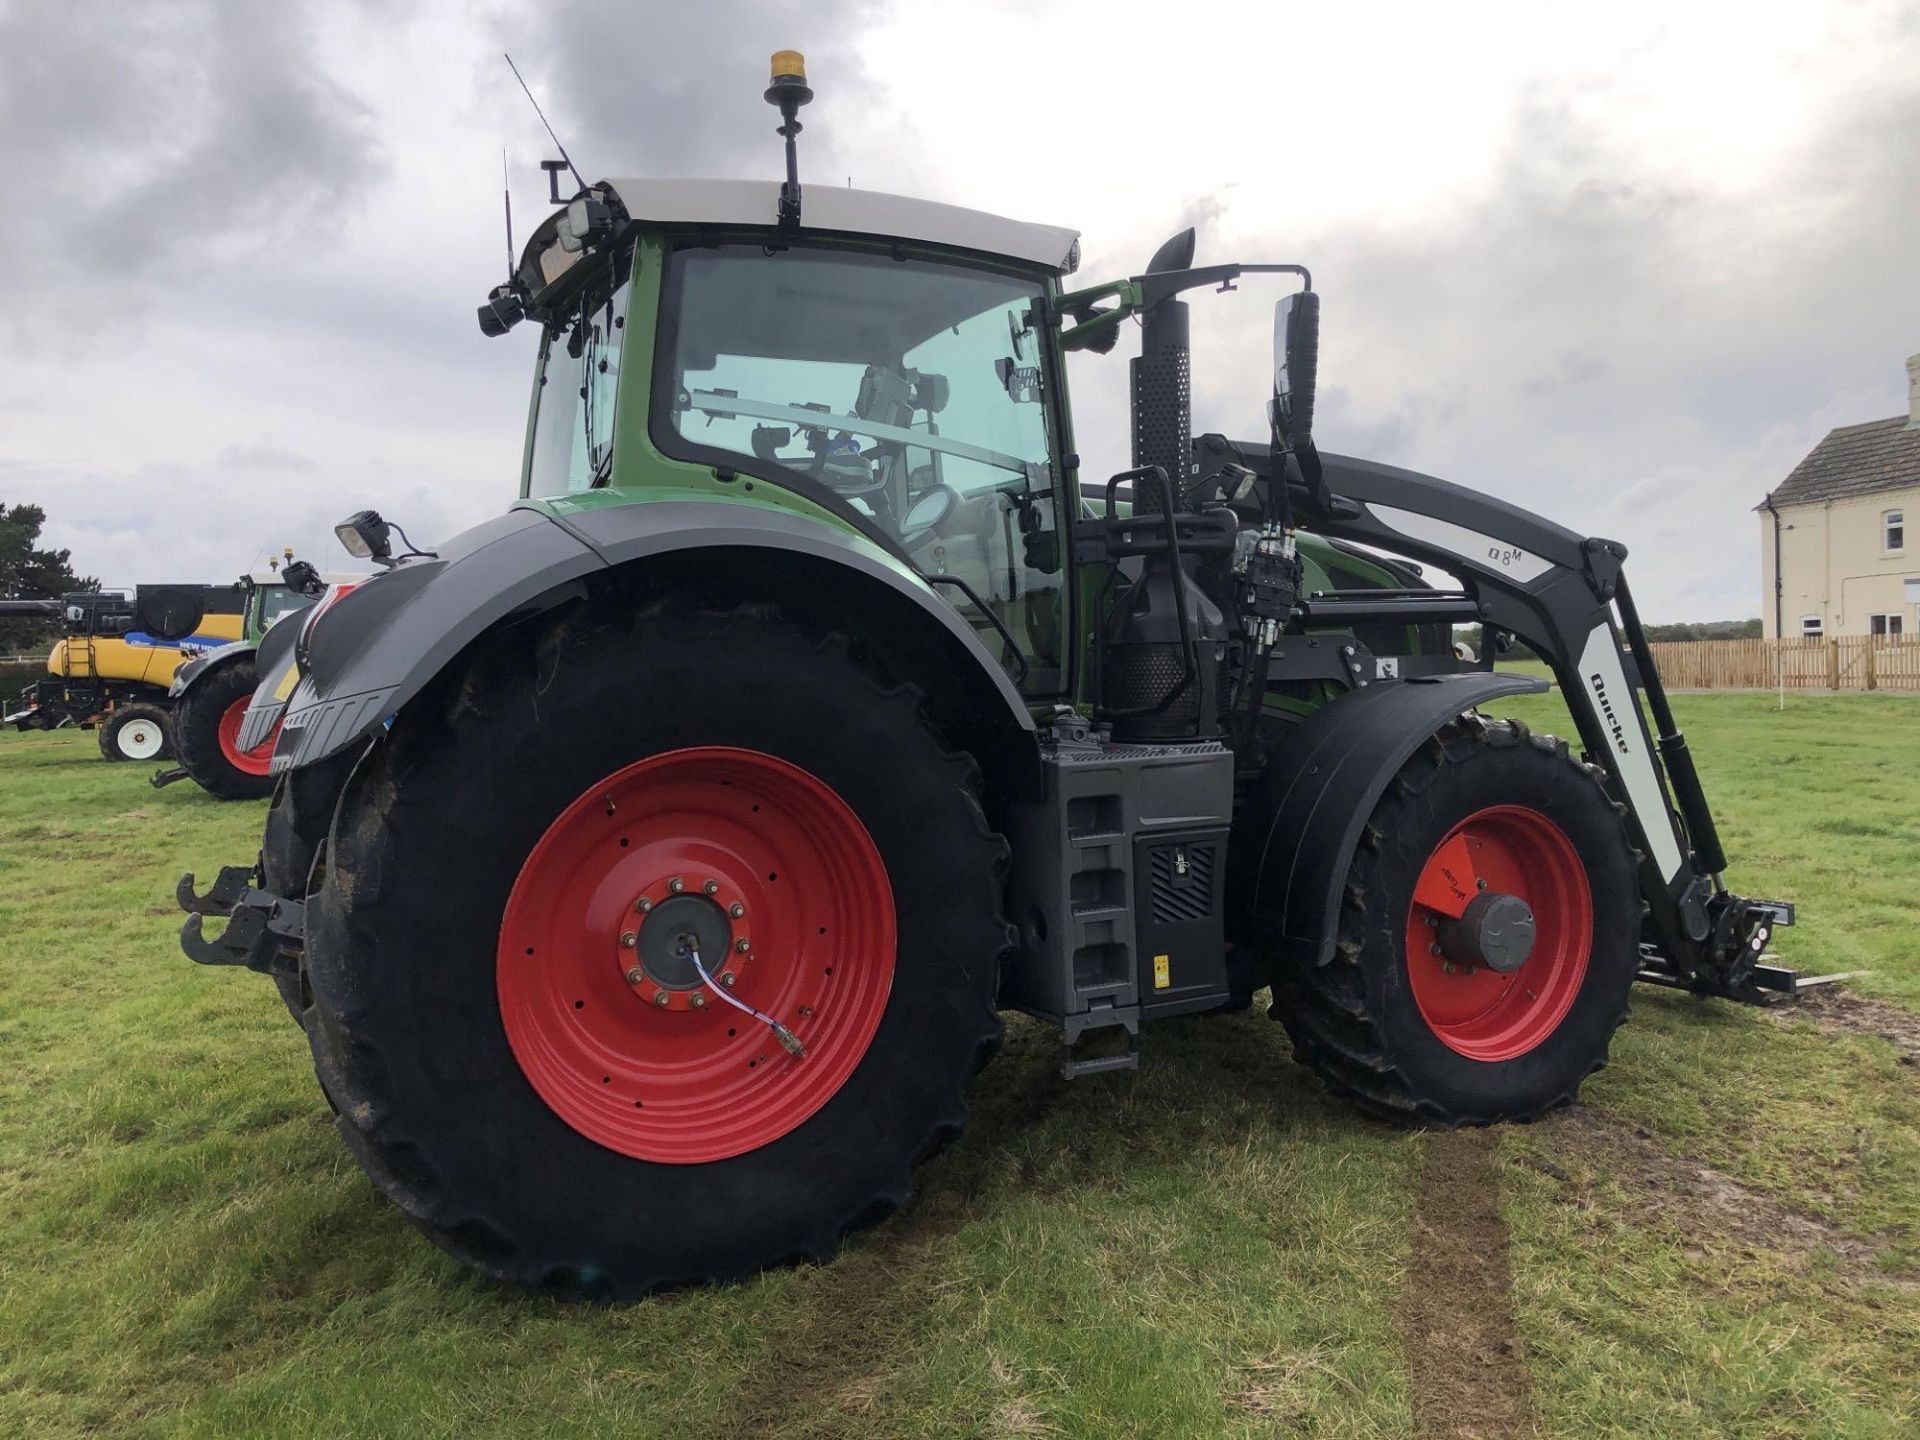 2018 Fendt 828 Vario Profi Plus 65kph 4wd tractor with Quicke Q8M front loader and pallet tines, fro - Image 13 of 29